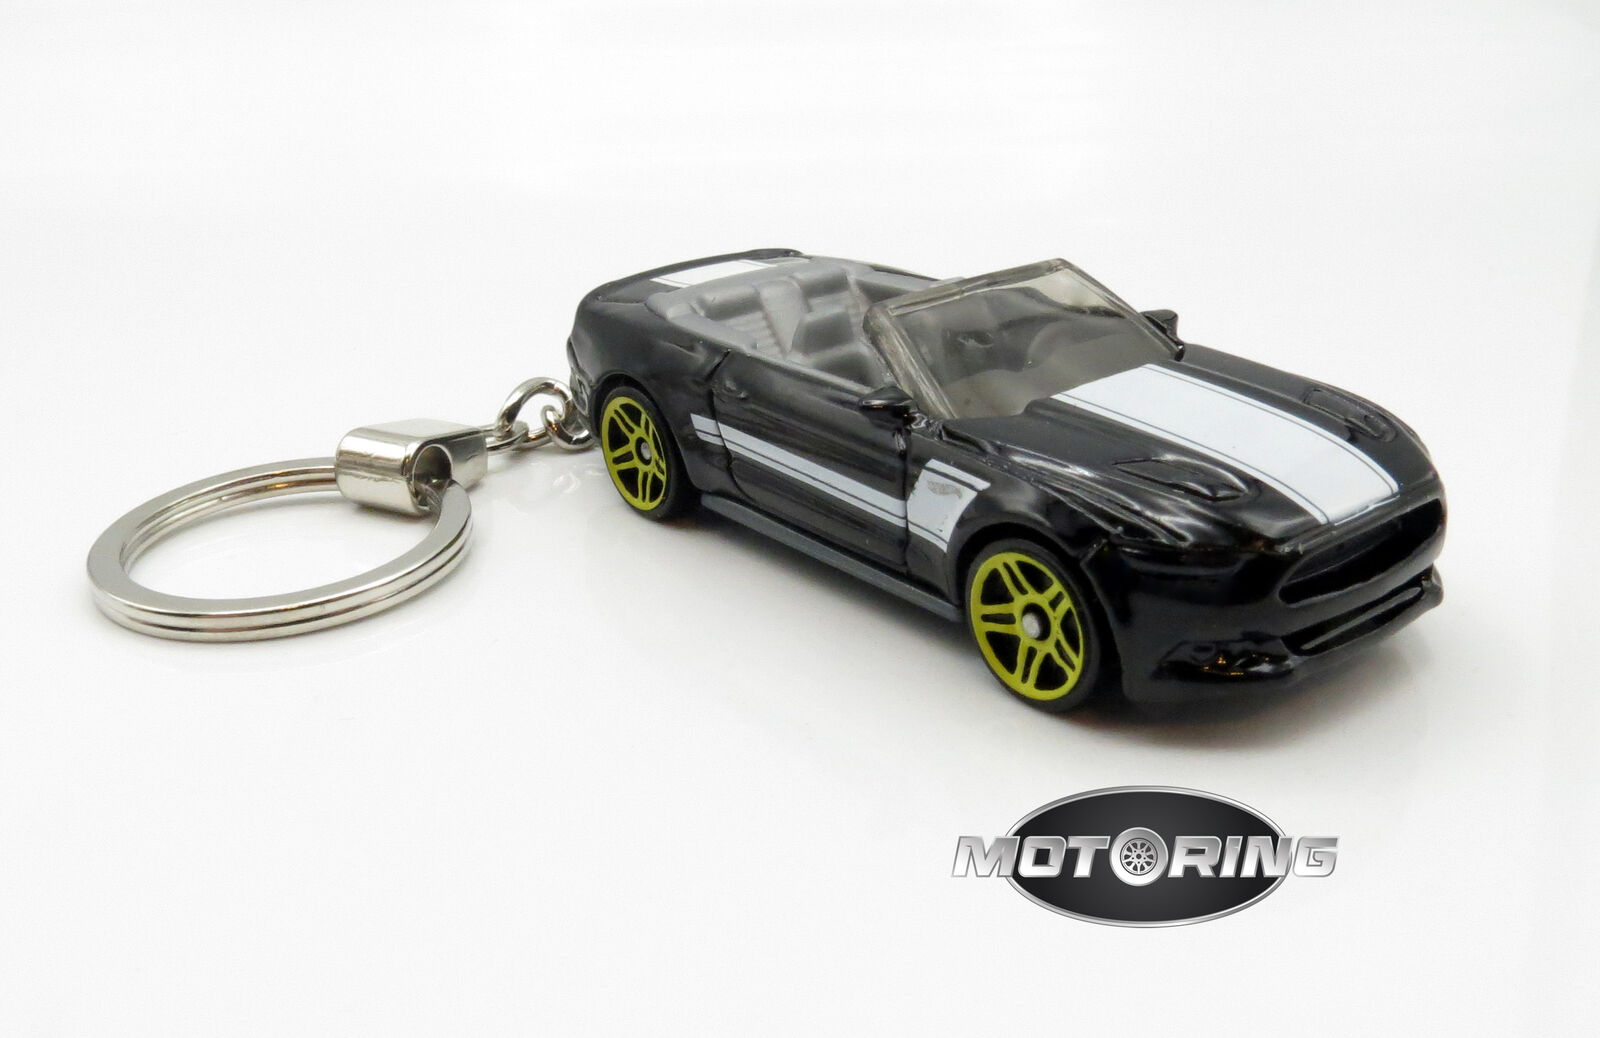 2015 '15 Ford Mustang GT Black Convertible Car Rare Novelty Keychain 1:64